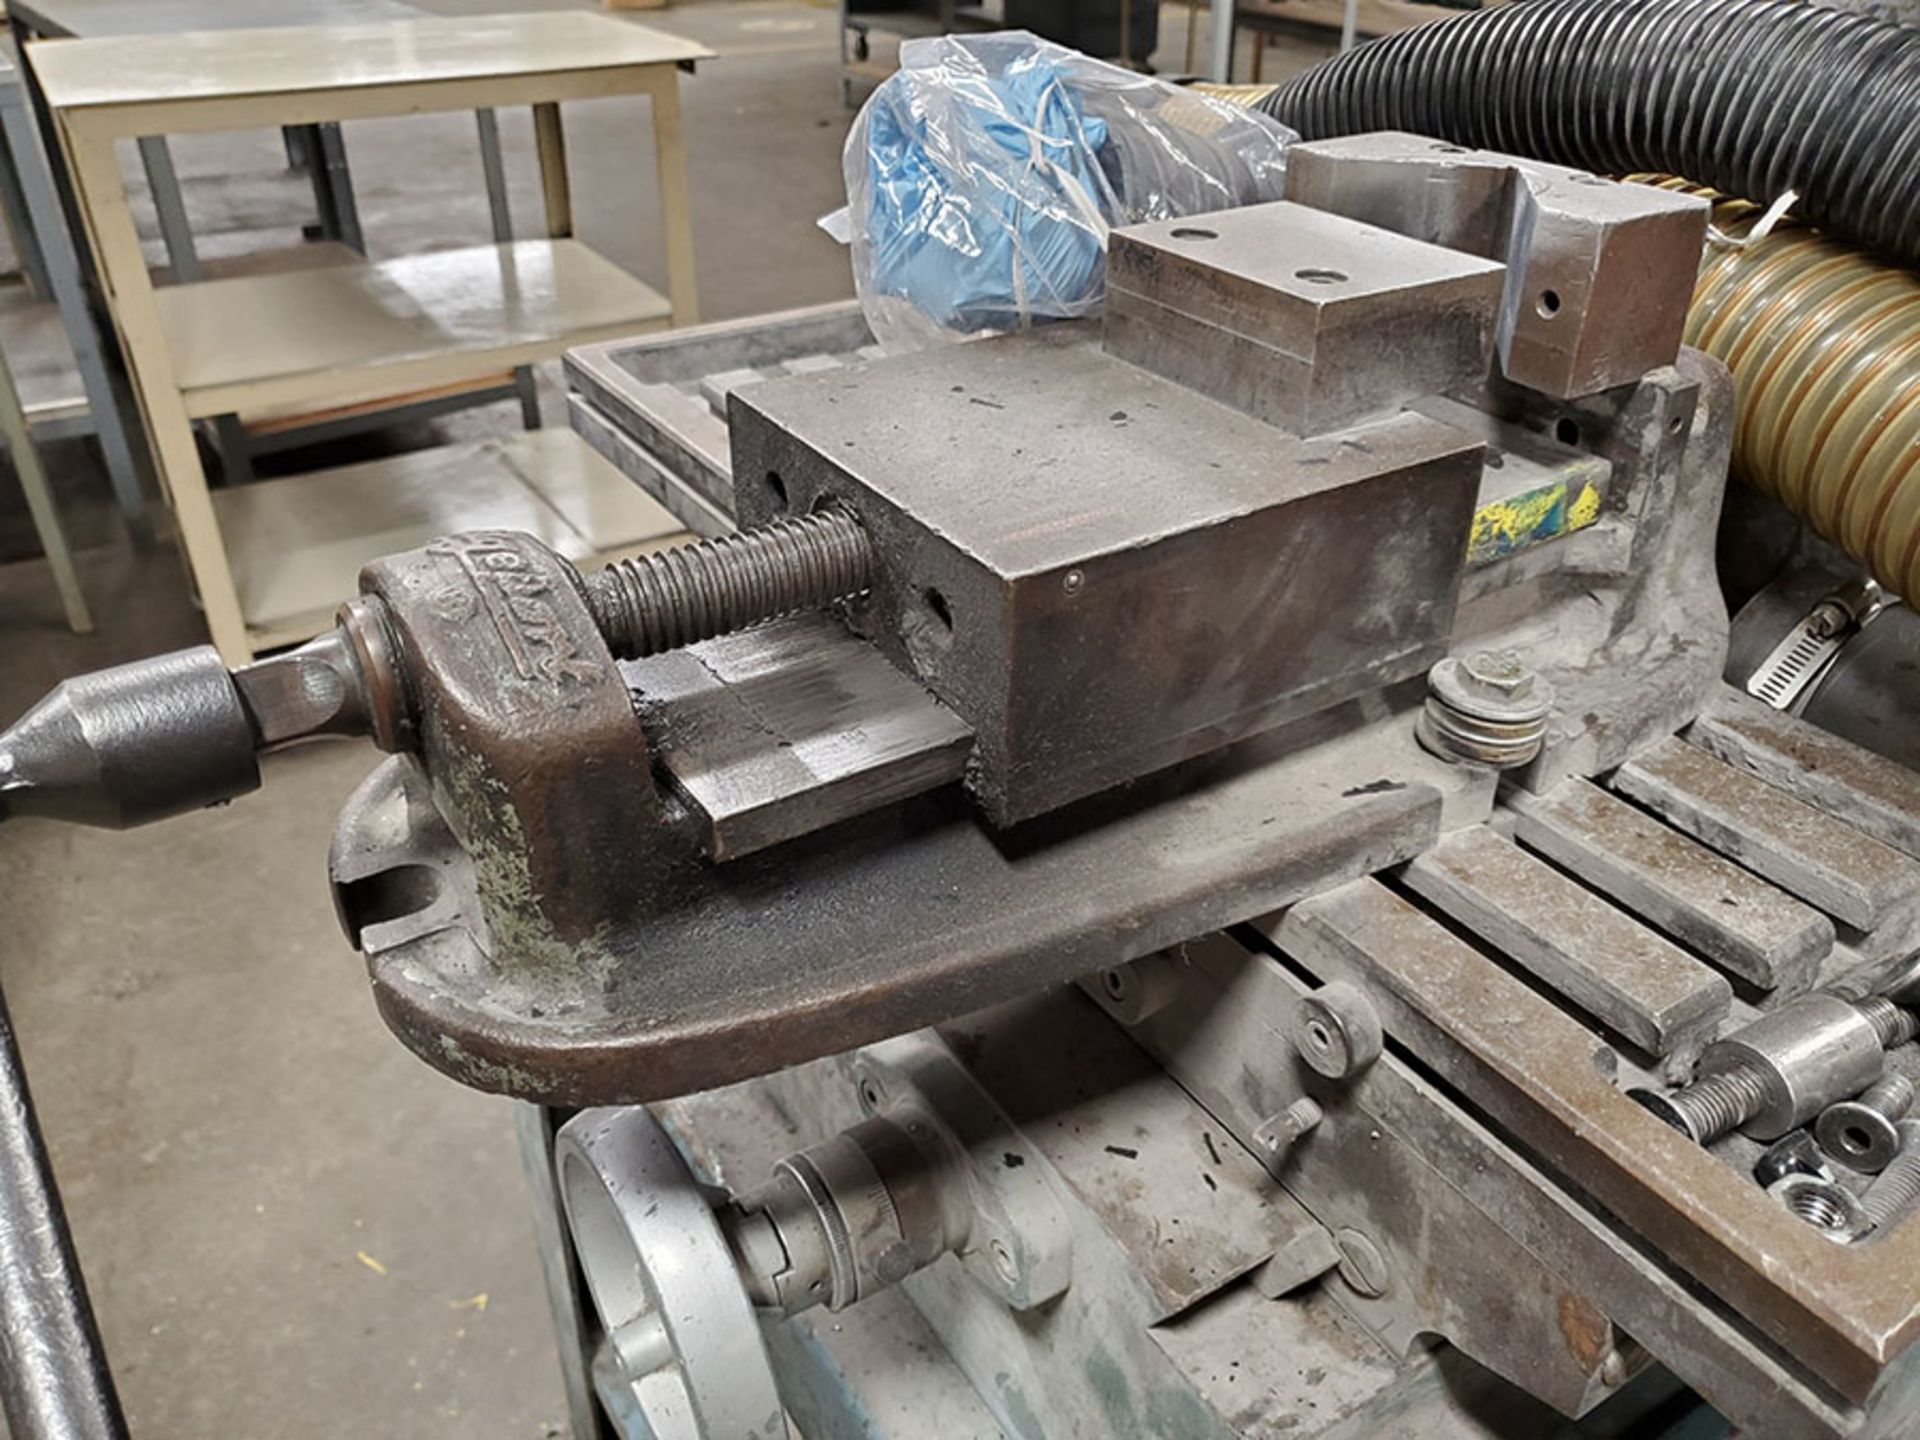 MSC MILLING AND DRILLING MACHINE; MODEL 954201, S/N 9991, MOUNTED ON TABLE WITH BRIDGEPORT VISE - Image 5 of 7